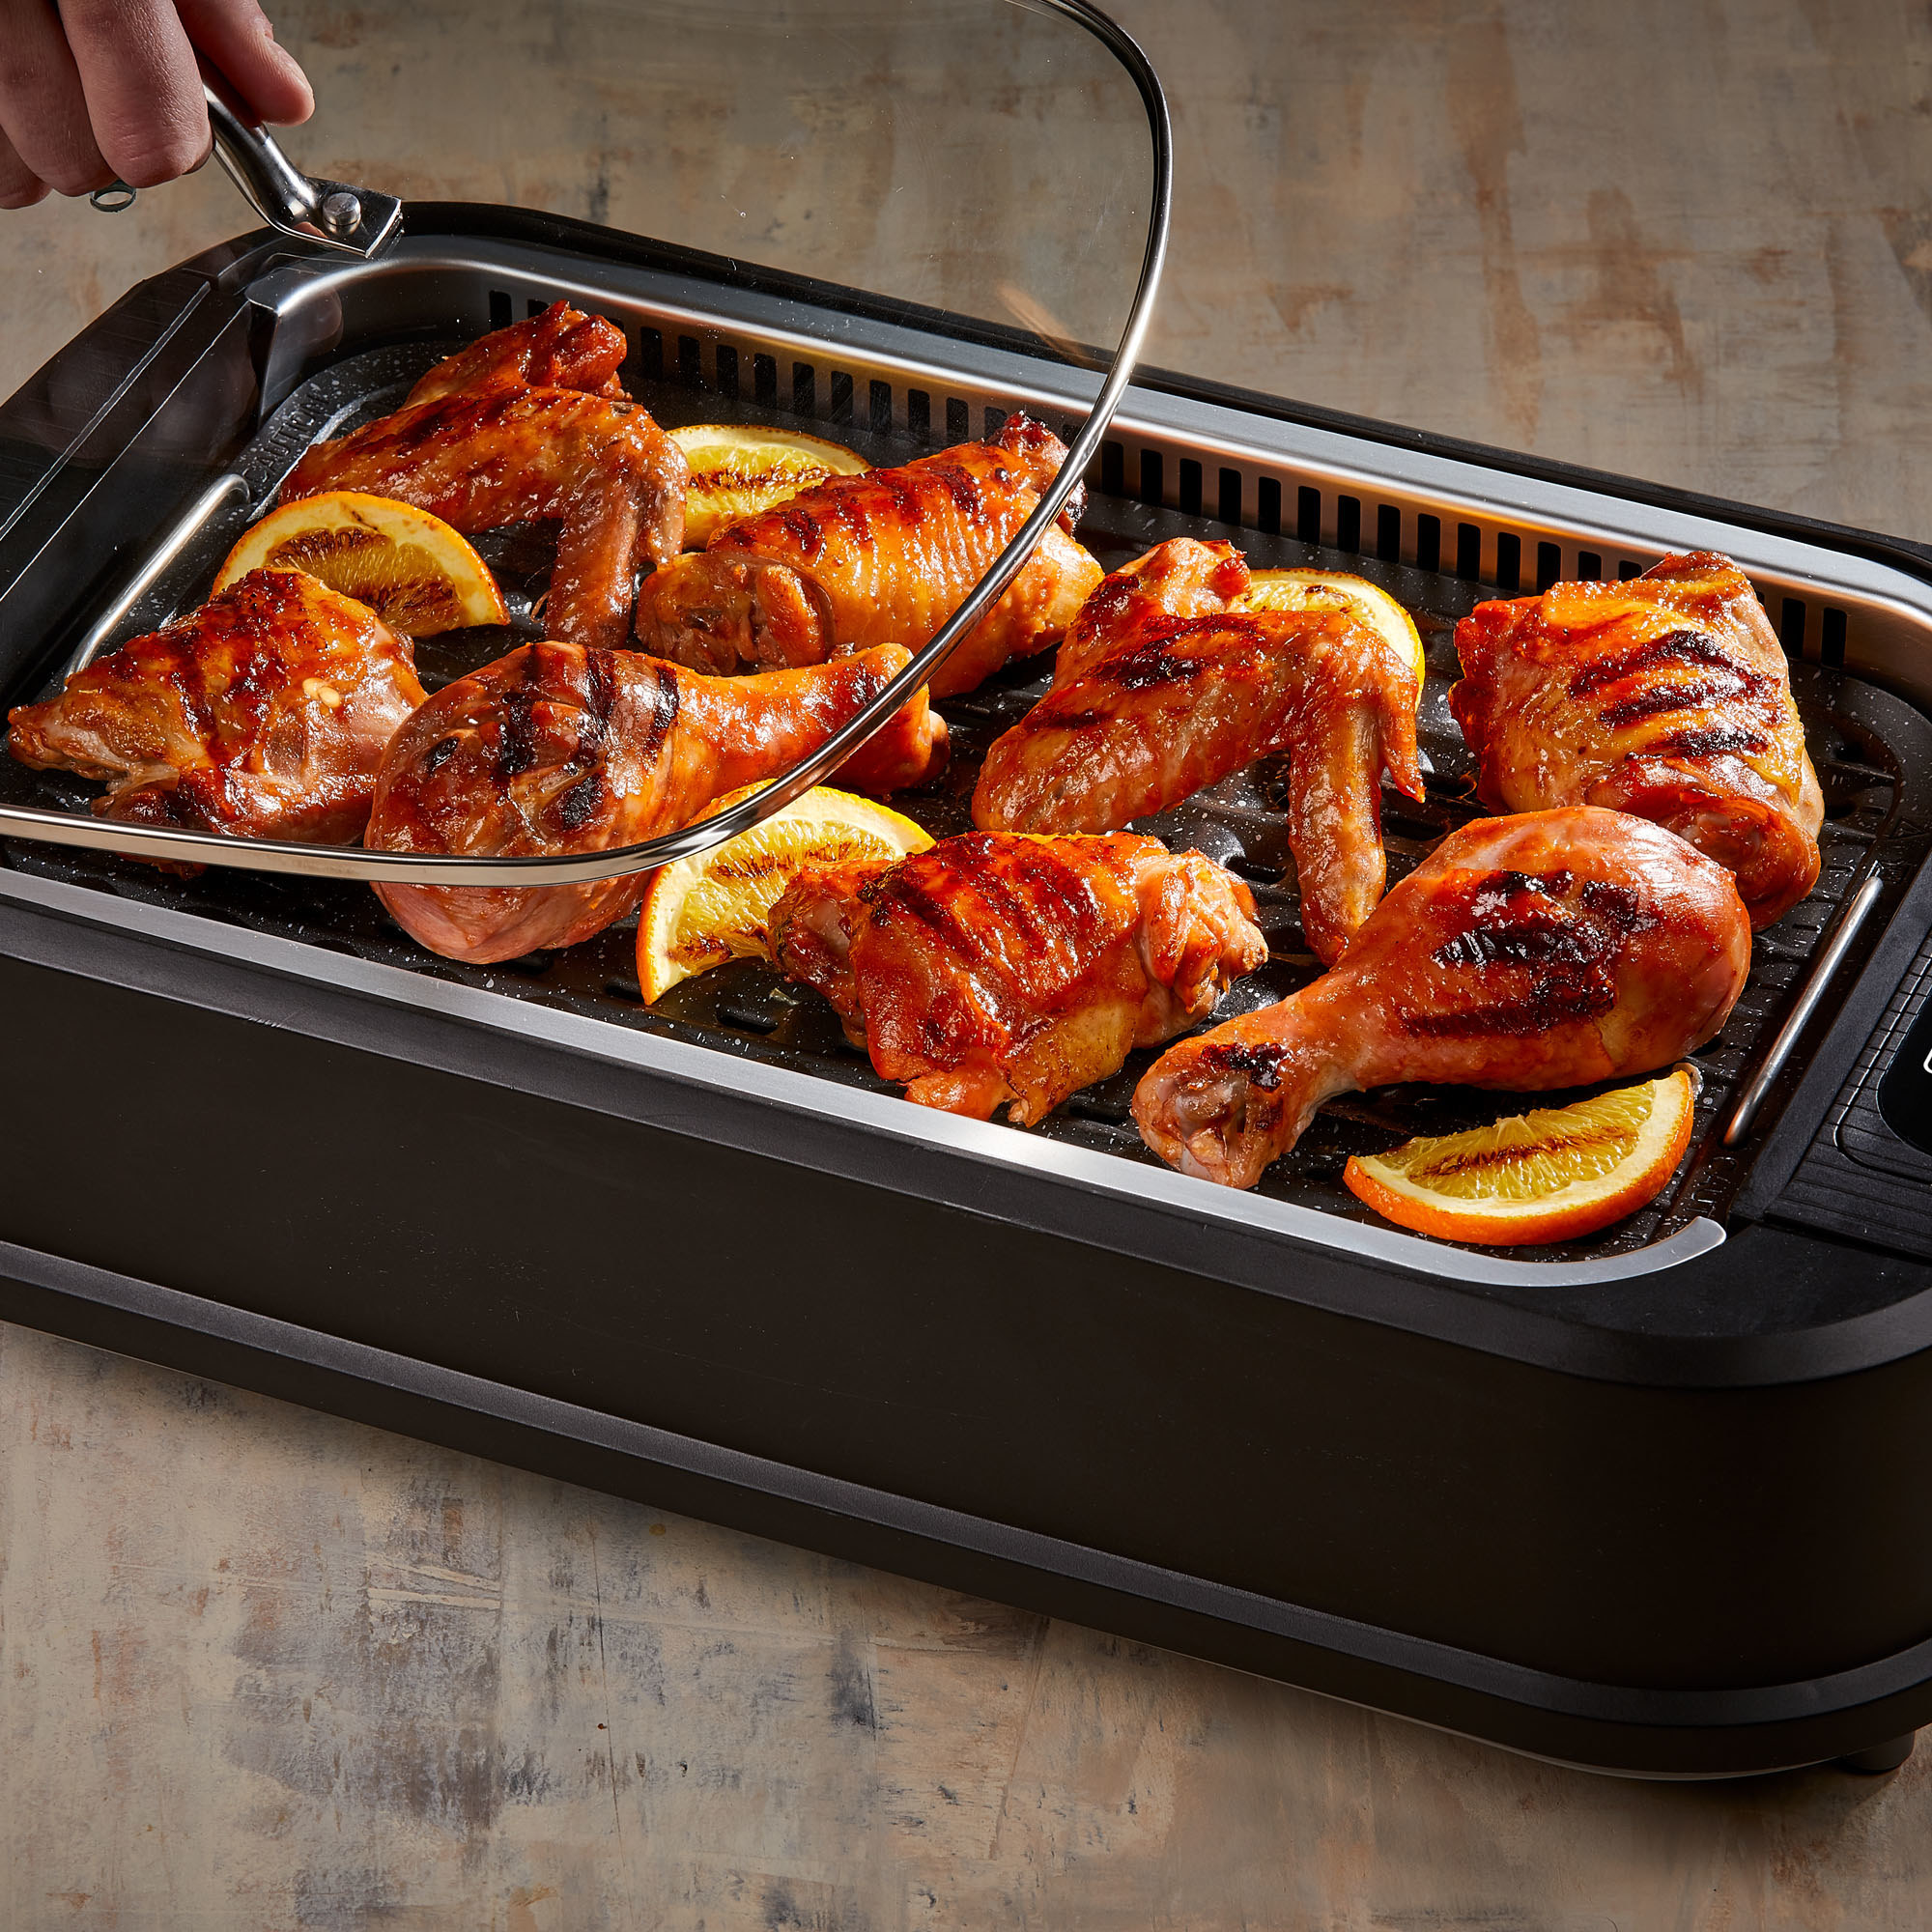 The small smokeless grill cooking chicken 